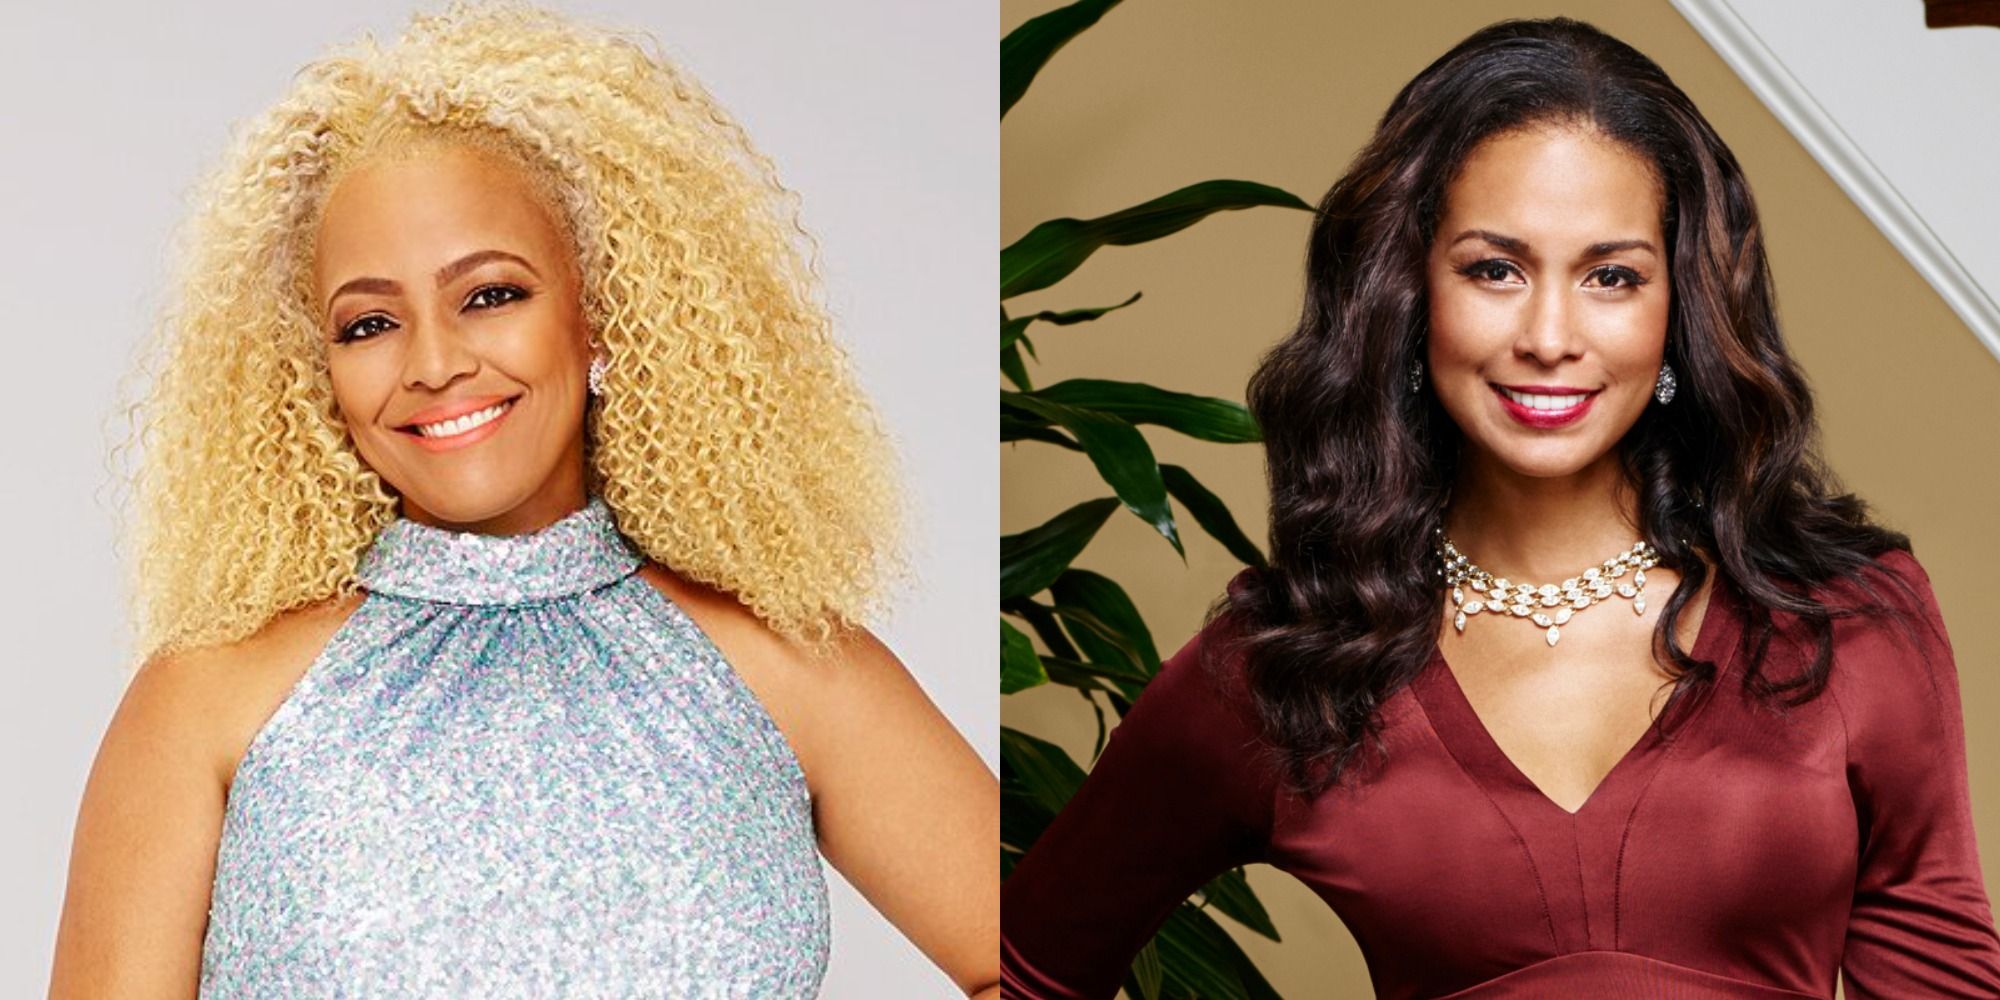 Split image showing Kim Fields and Katie Rost smiling